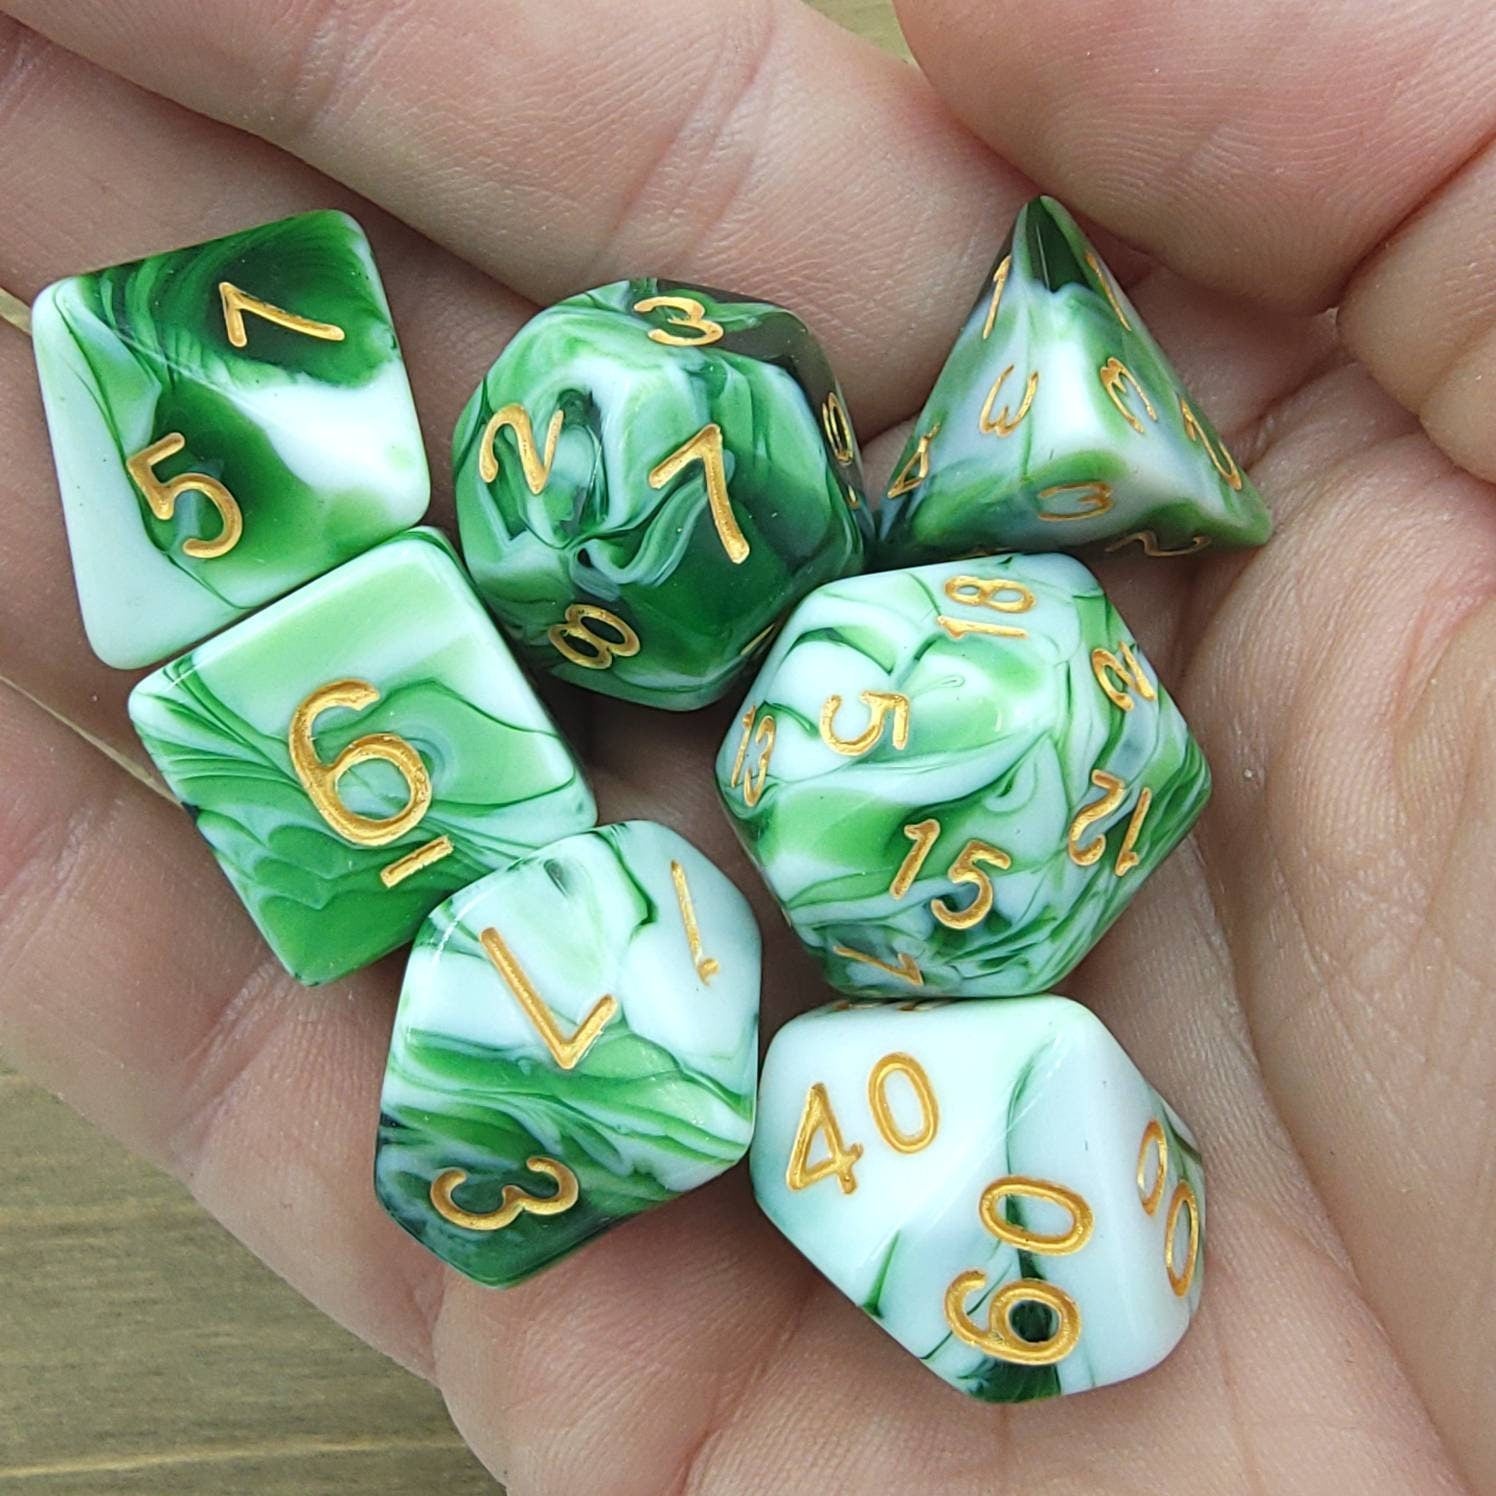 Apple Swirl | RPG Dice Set| RPG Dice | Polyhedral Dice Set | Dungeons and Dragons | DnD Dice Set | Gaming Dice Set